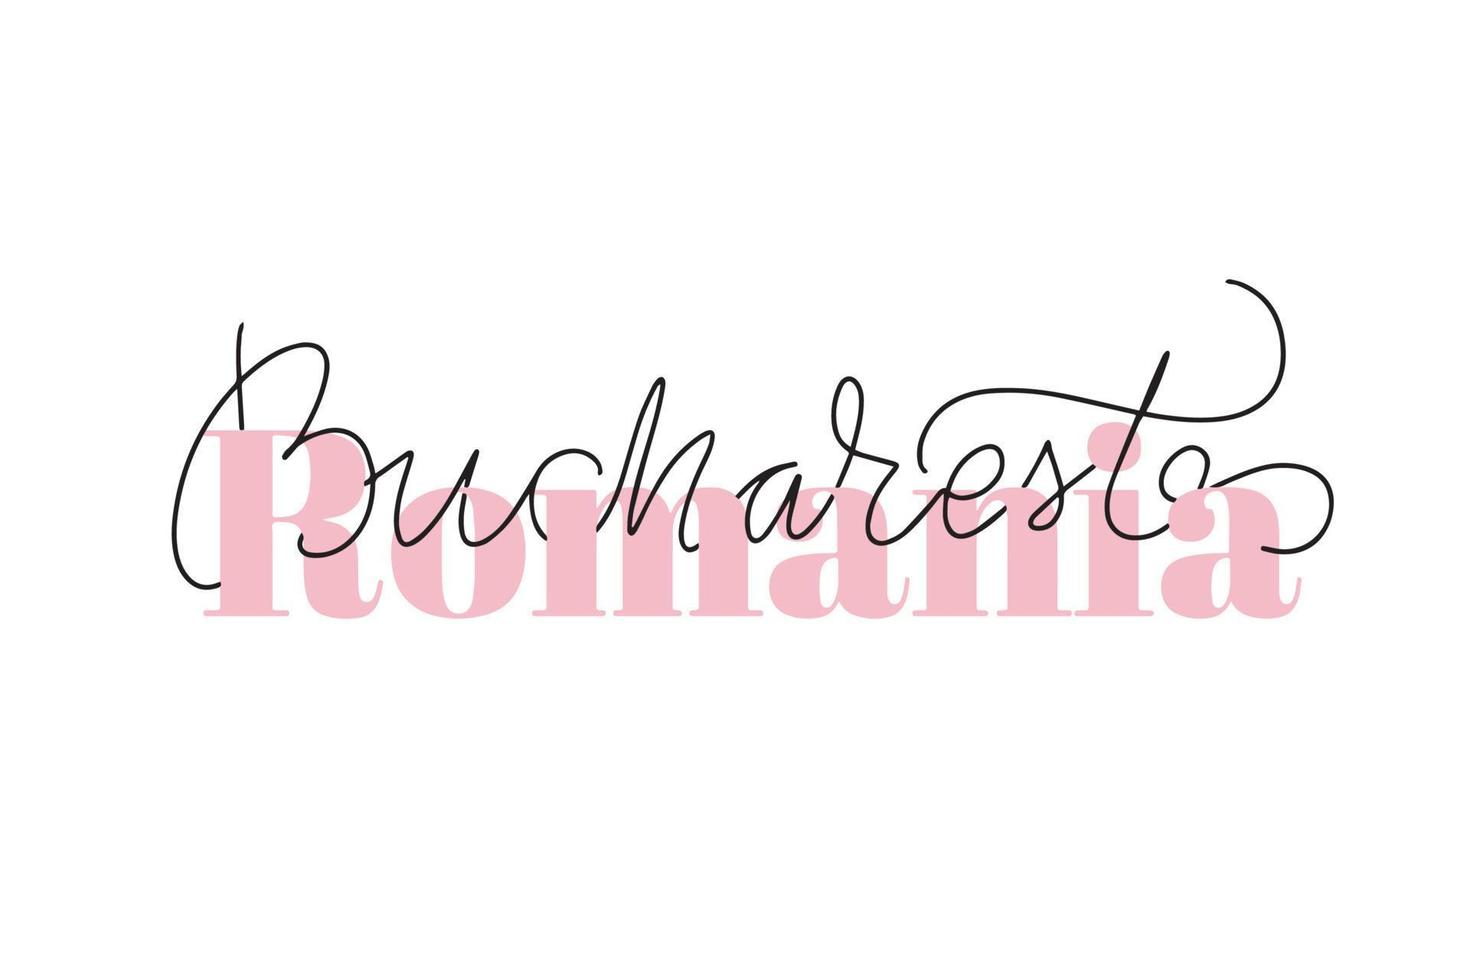 Inspirational handwritten brush lettering Romania Bucharest. Vector calligraphy illustration isolated on white background. Typography for banners, badges, postcard, tshirt, prints, posters.